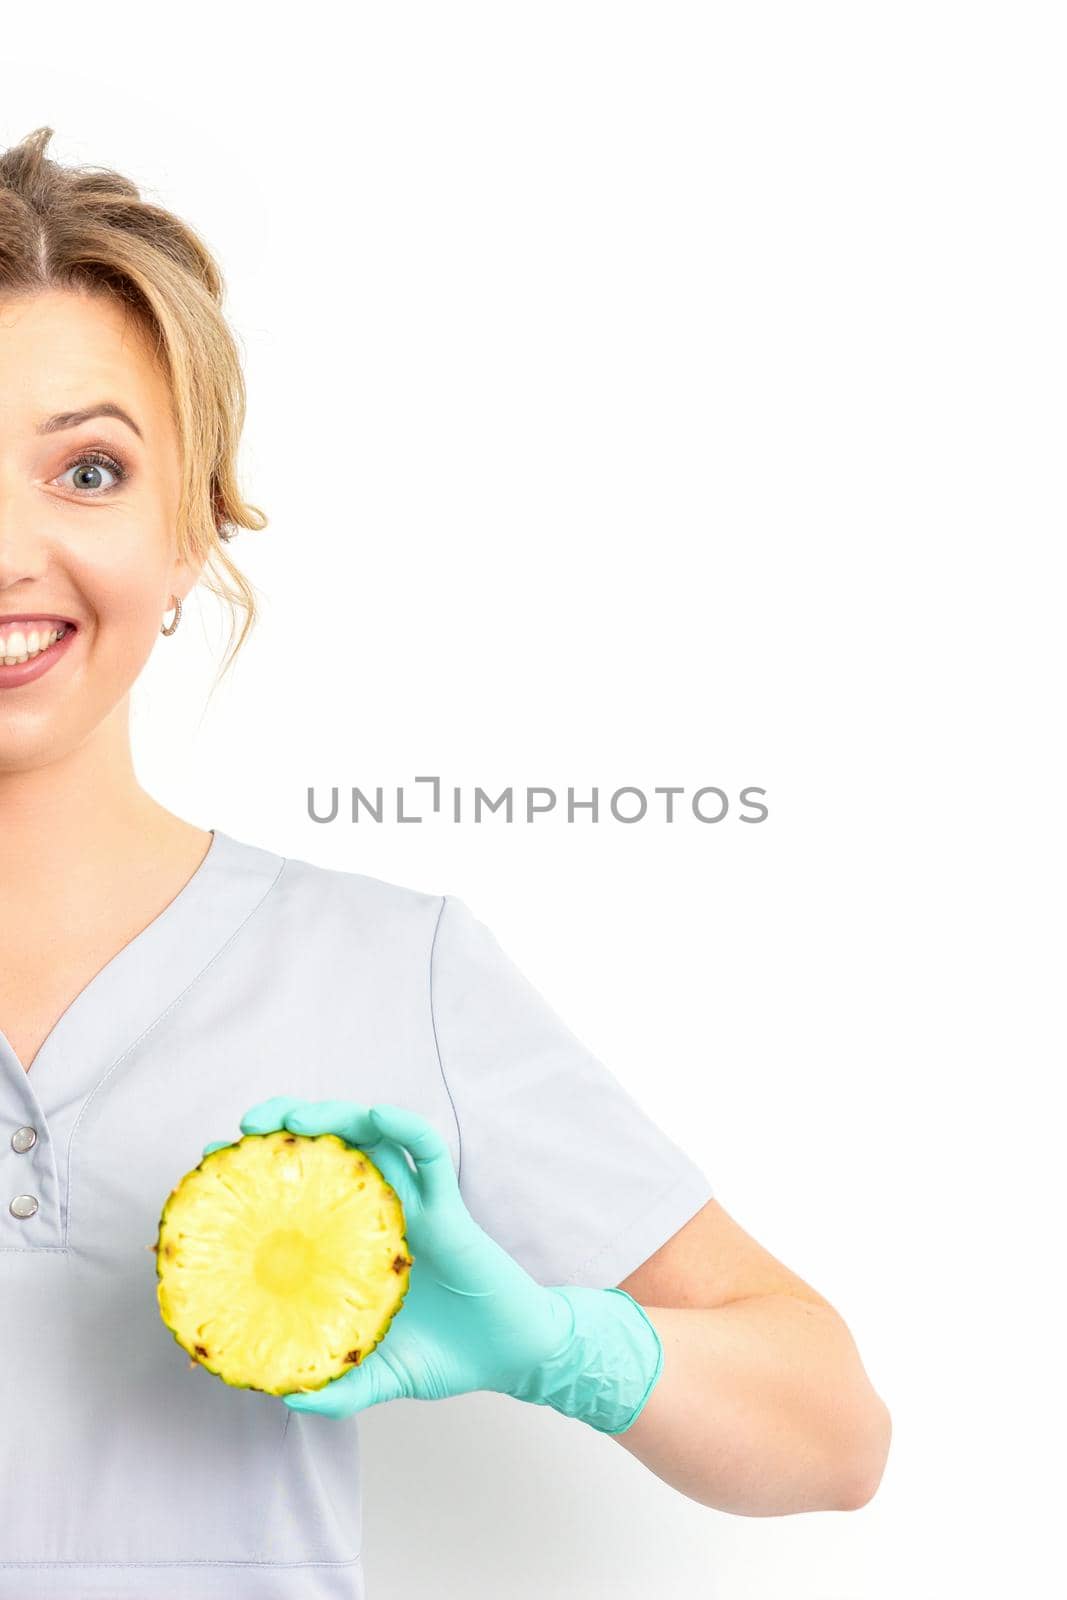 Young Caucasian smiling woman doctor nutritionist holding slices pineapple over isolated white background, breast health concept. by okskukuruza